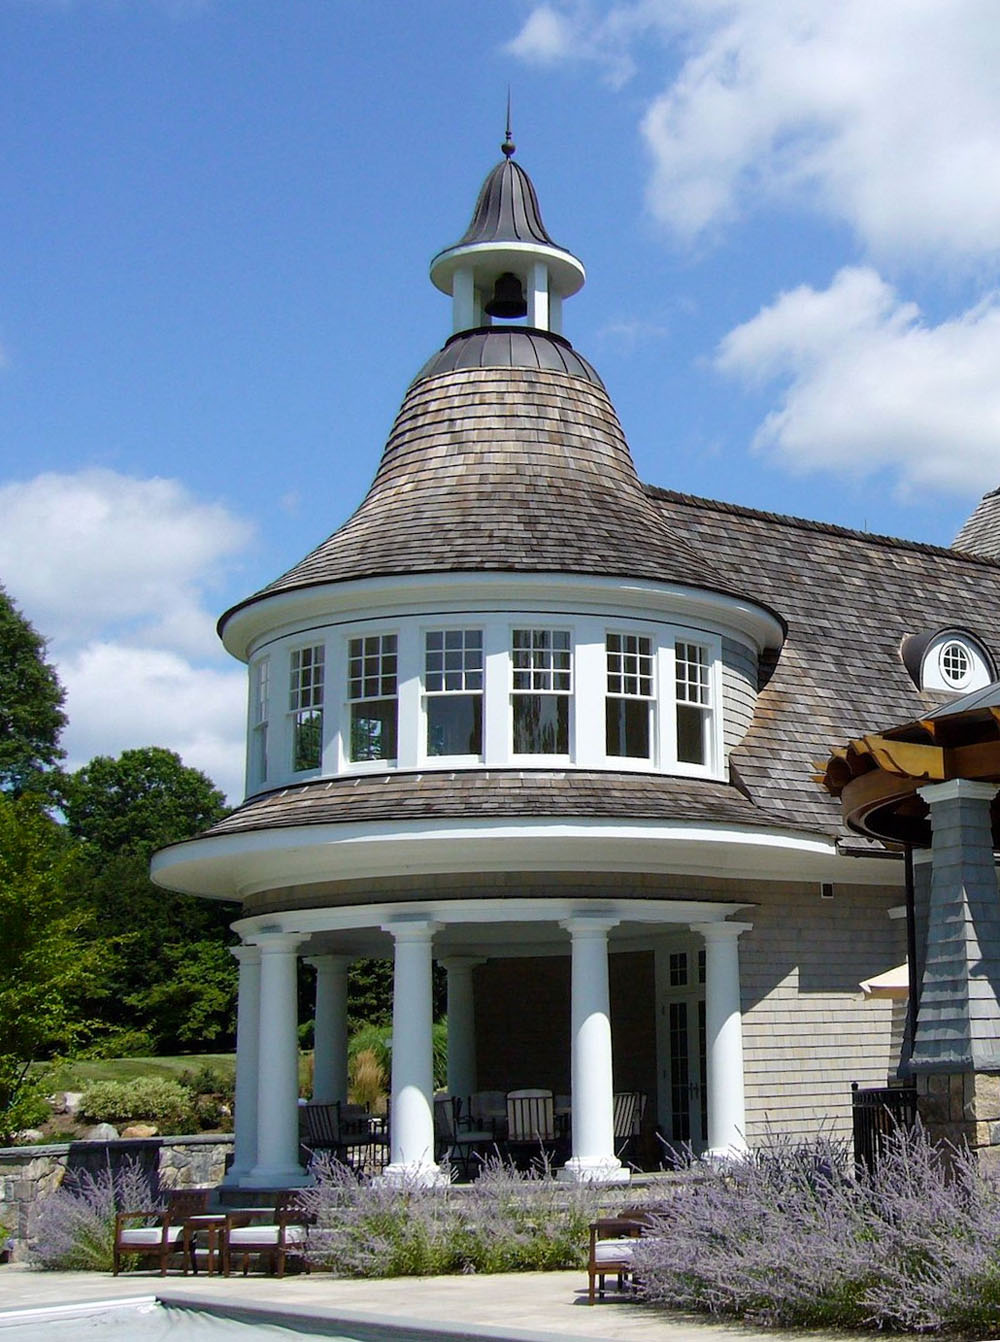 Shingle Style House with Bell Tower and Turret